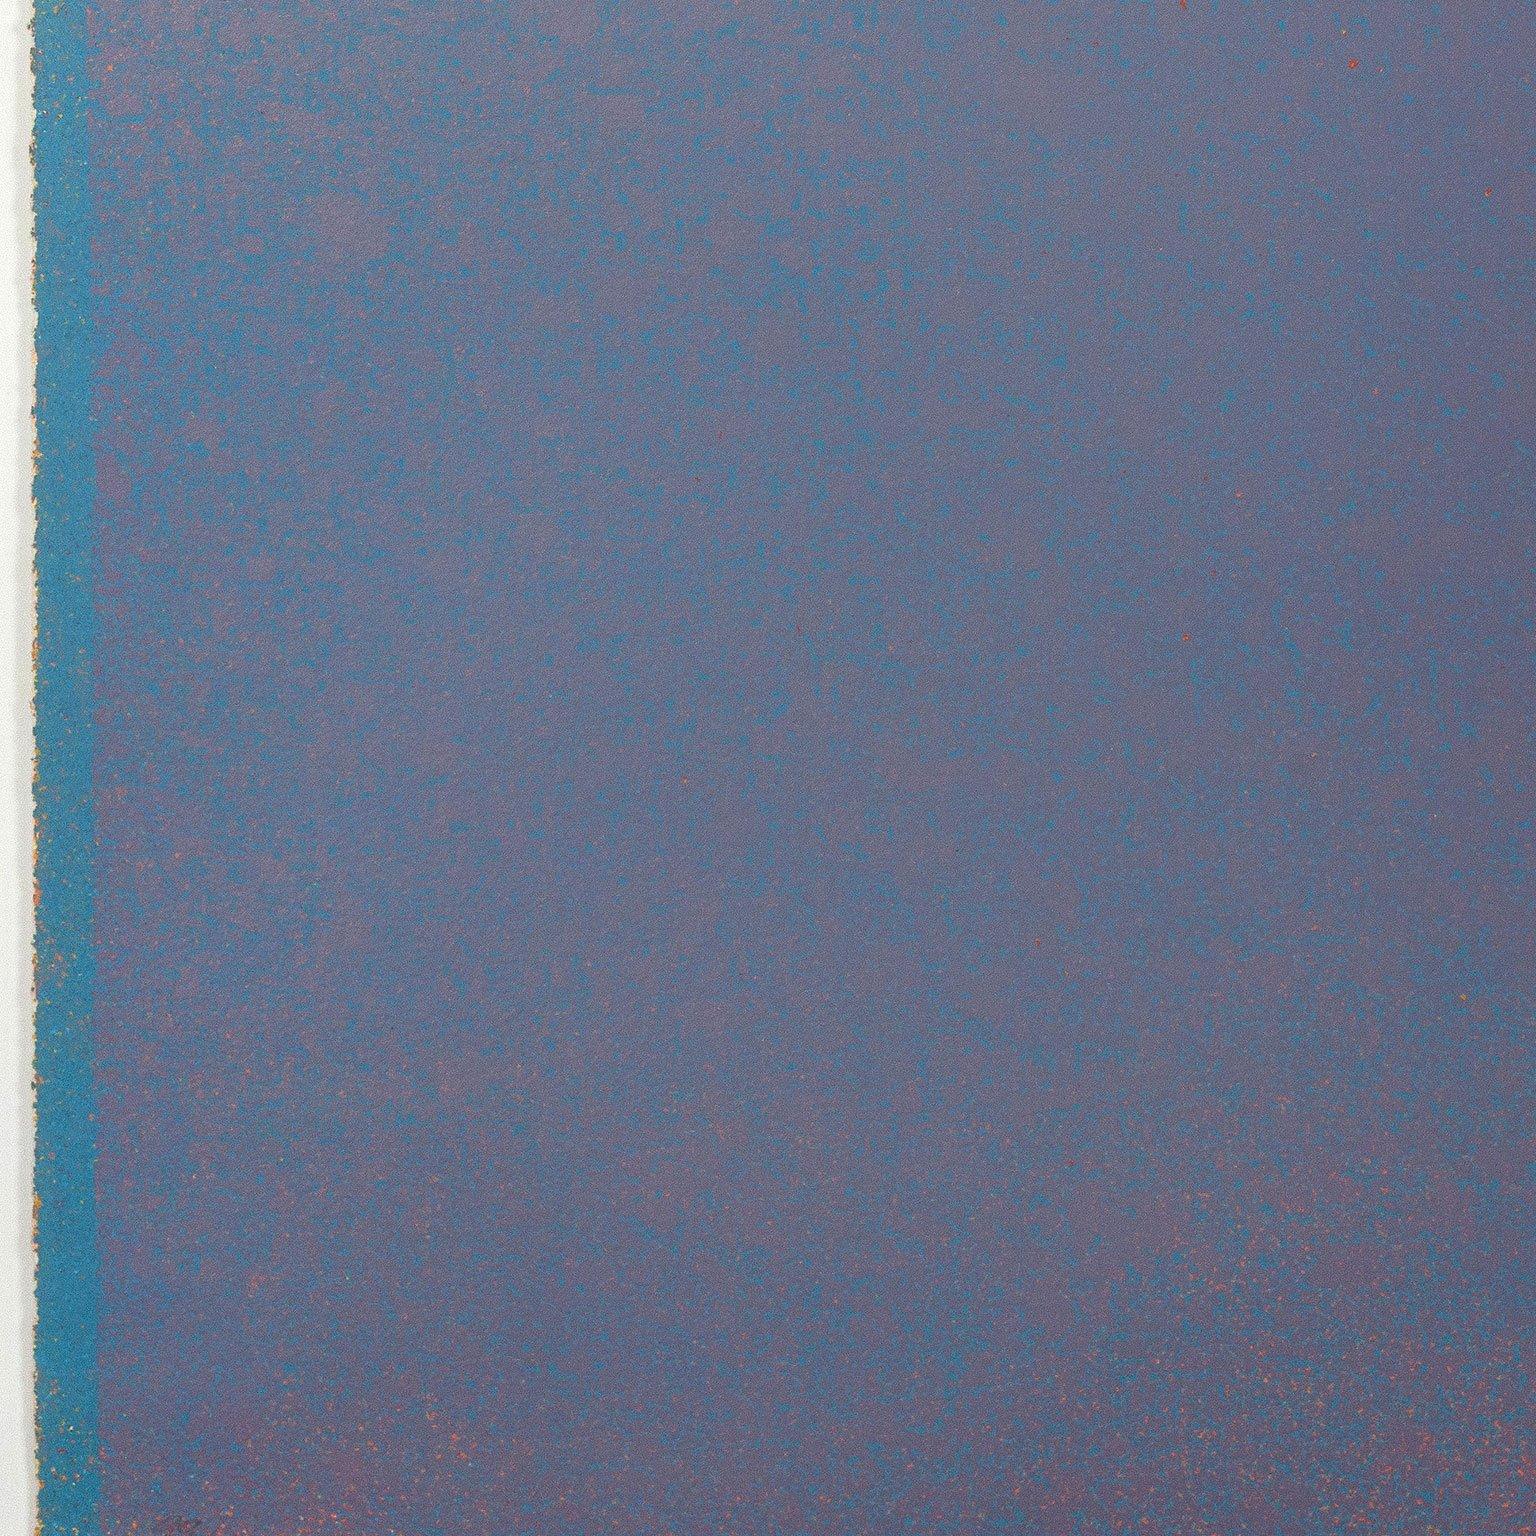 GRAPHIC SUITE I (MAUVE/BLUE) - Abstract Expressionist Print by Jules Olitski